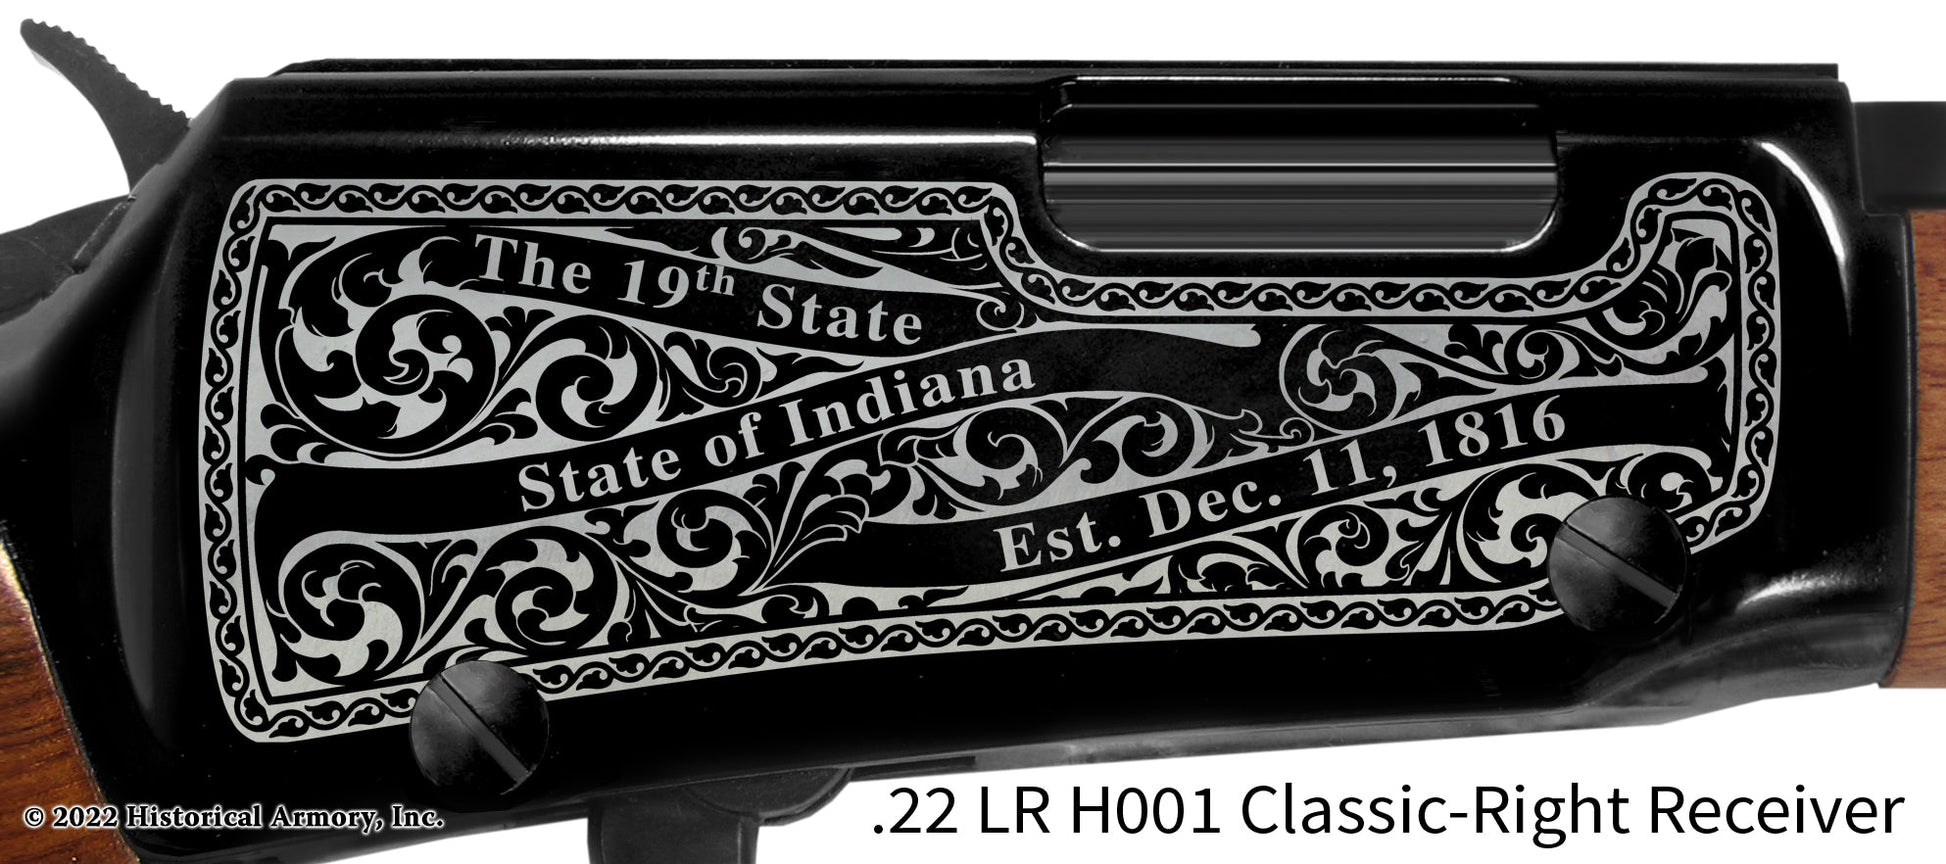 Benton County Indiana Engraved Henry H001 Rifle